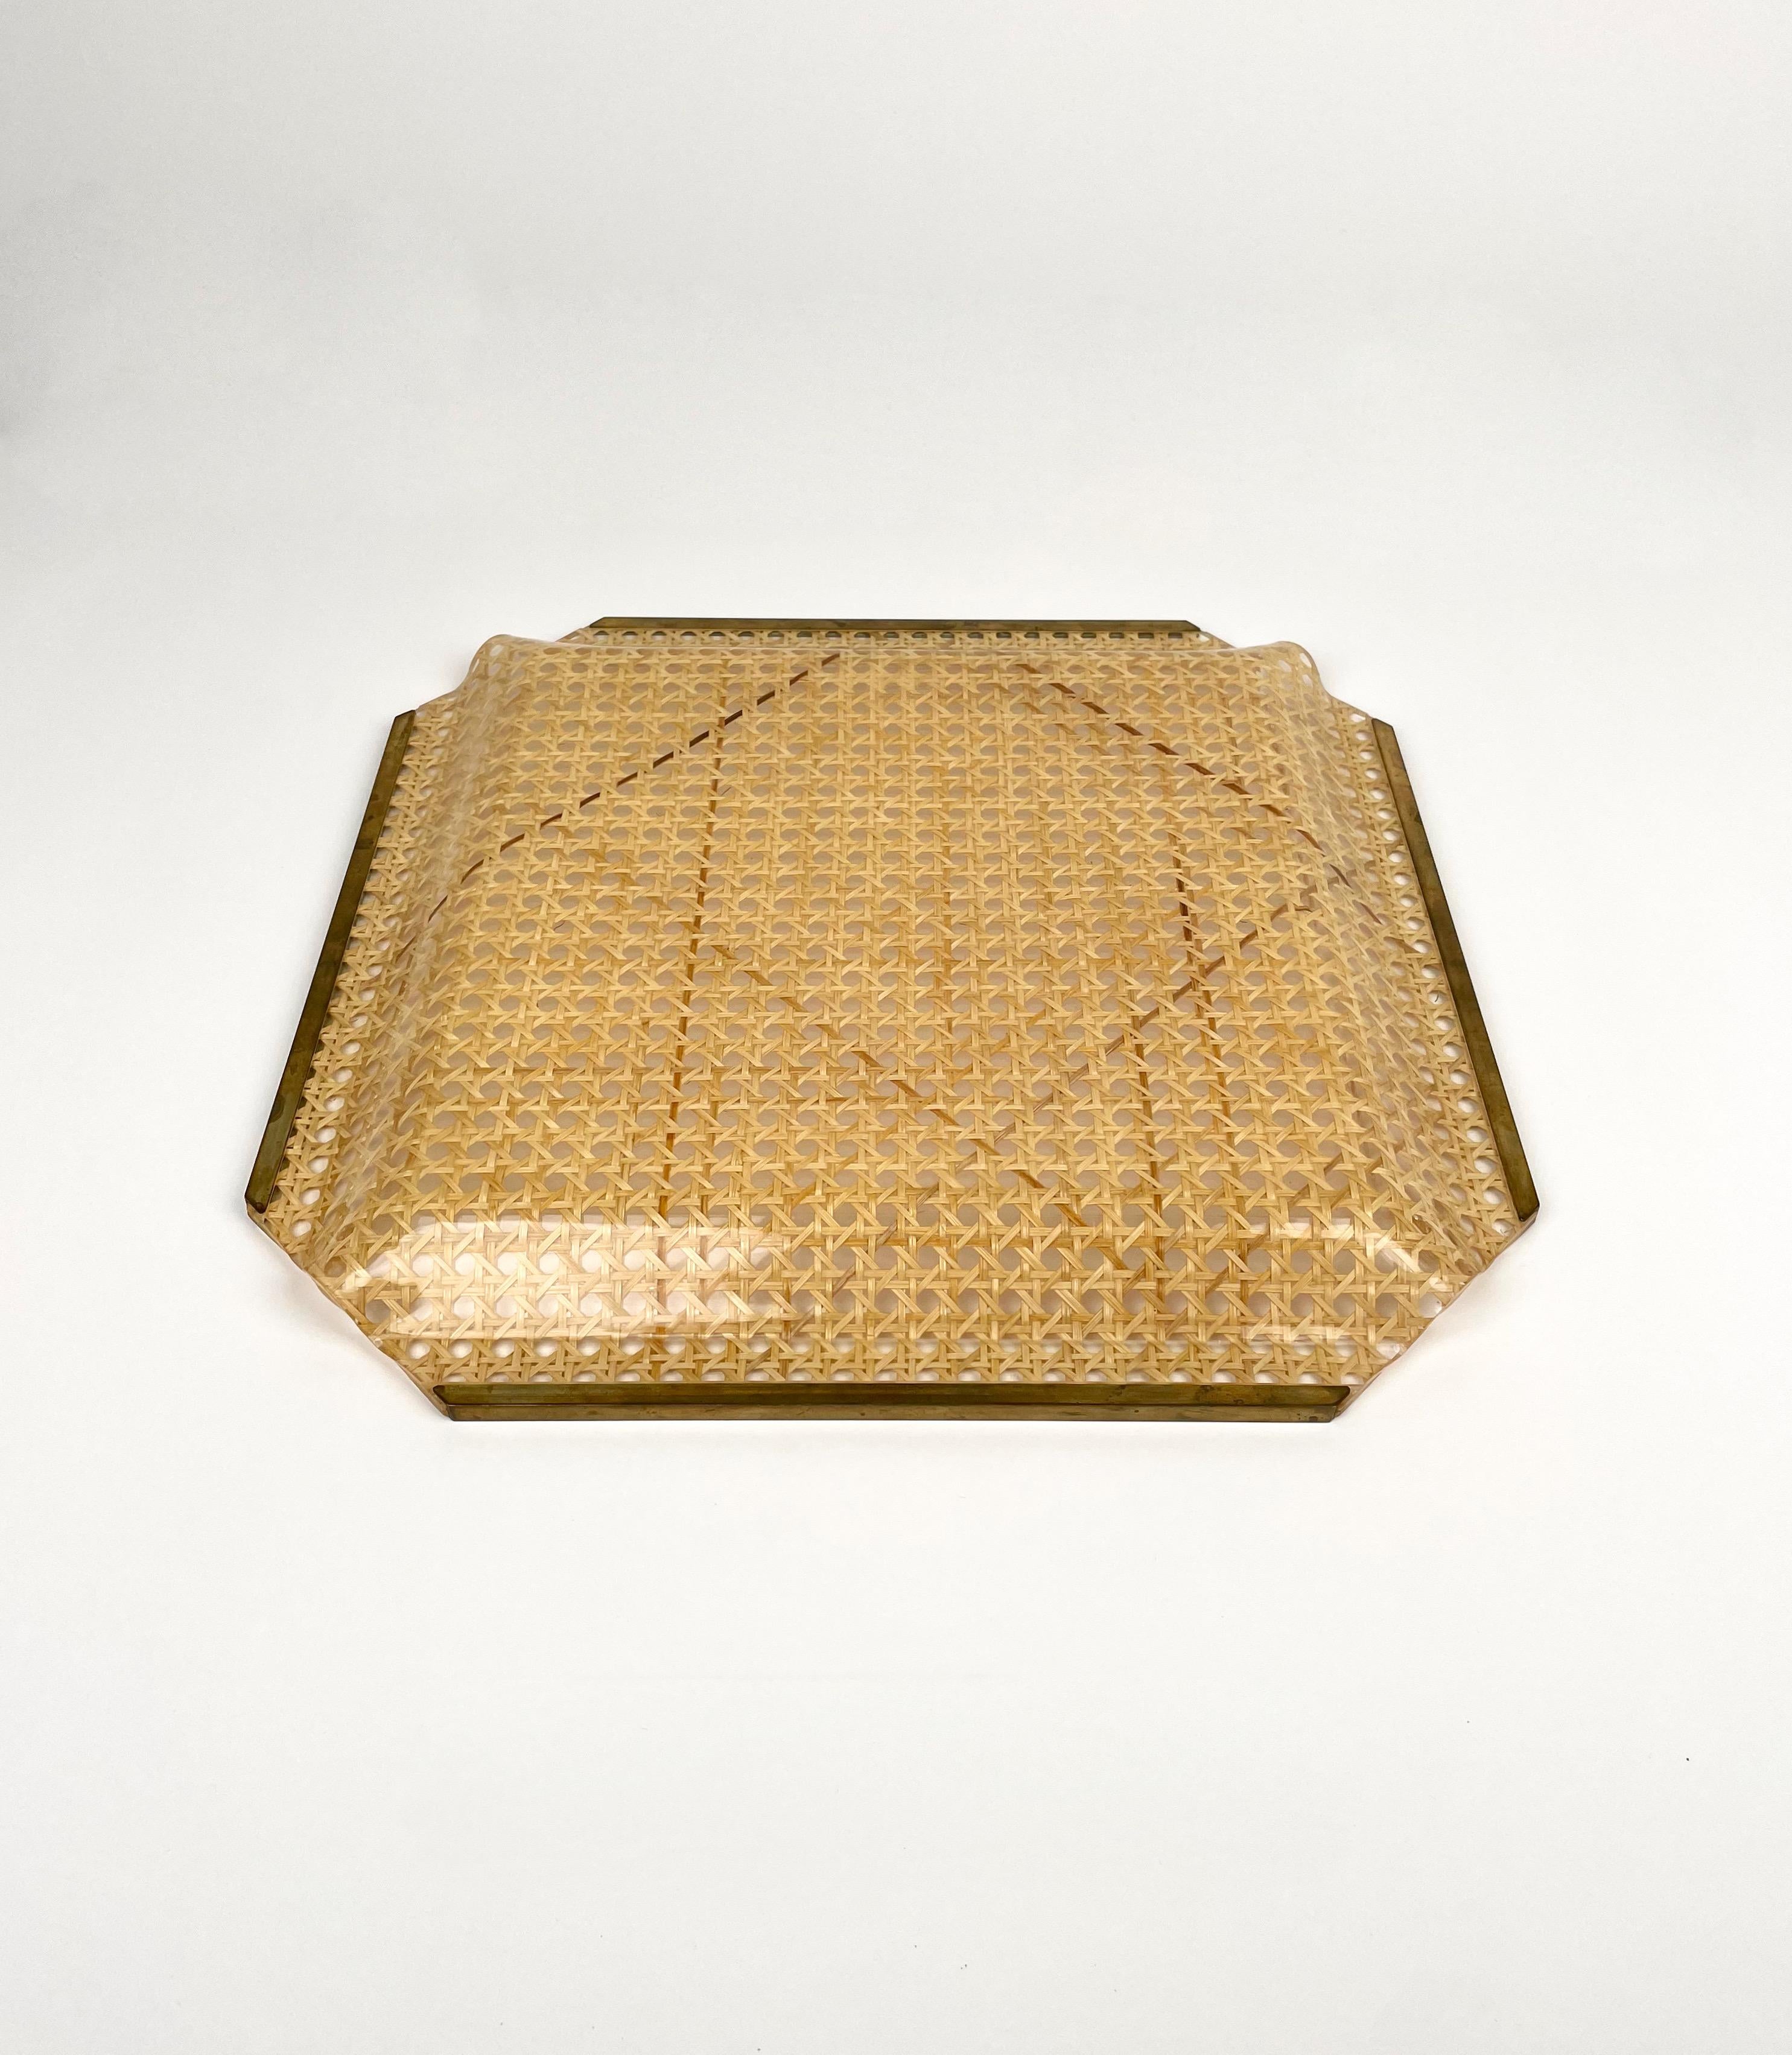 Centerpiece in Lucite, Rattan & Brass Christian Dior Style, Italy, 1970s For Sale 4